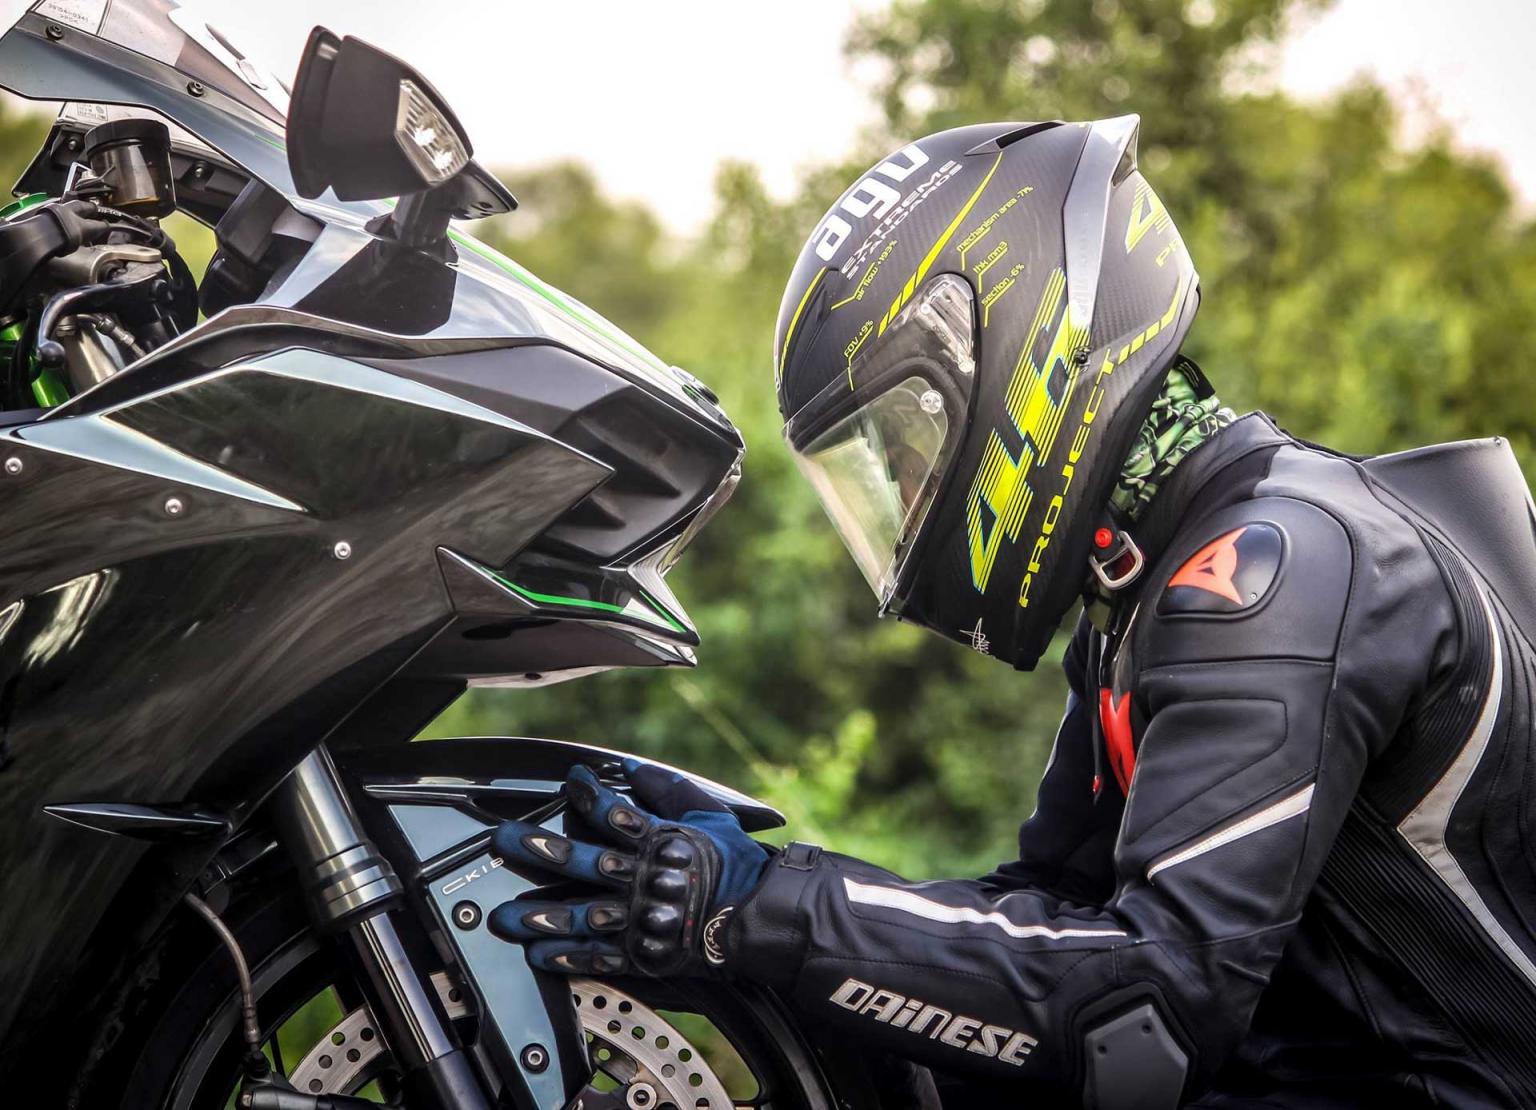 The Most Popular Motorbike Brands in 2020 - 3Dom Wraps